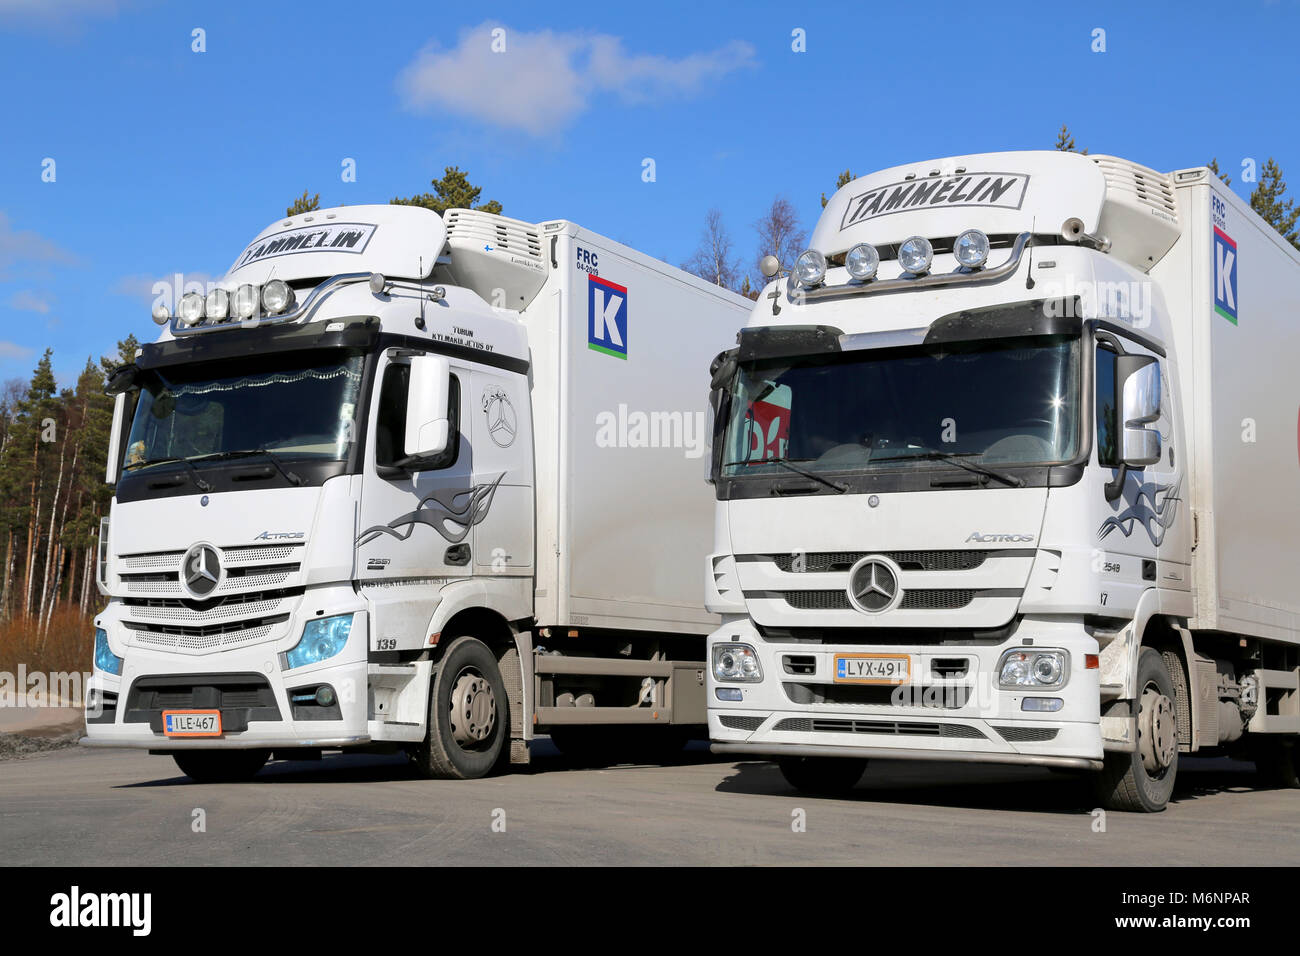 LIETO, FINLAND - MARCH 22, 2014: White Mercedes Benz Actros trucks on a yard. With the TopFit Truck project, Mercedes-Benz is making drivers the focus Stock Photo